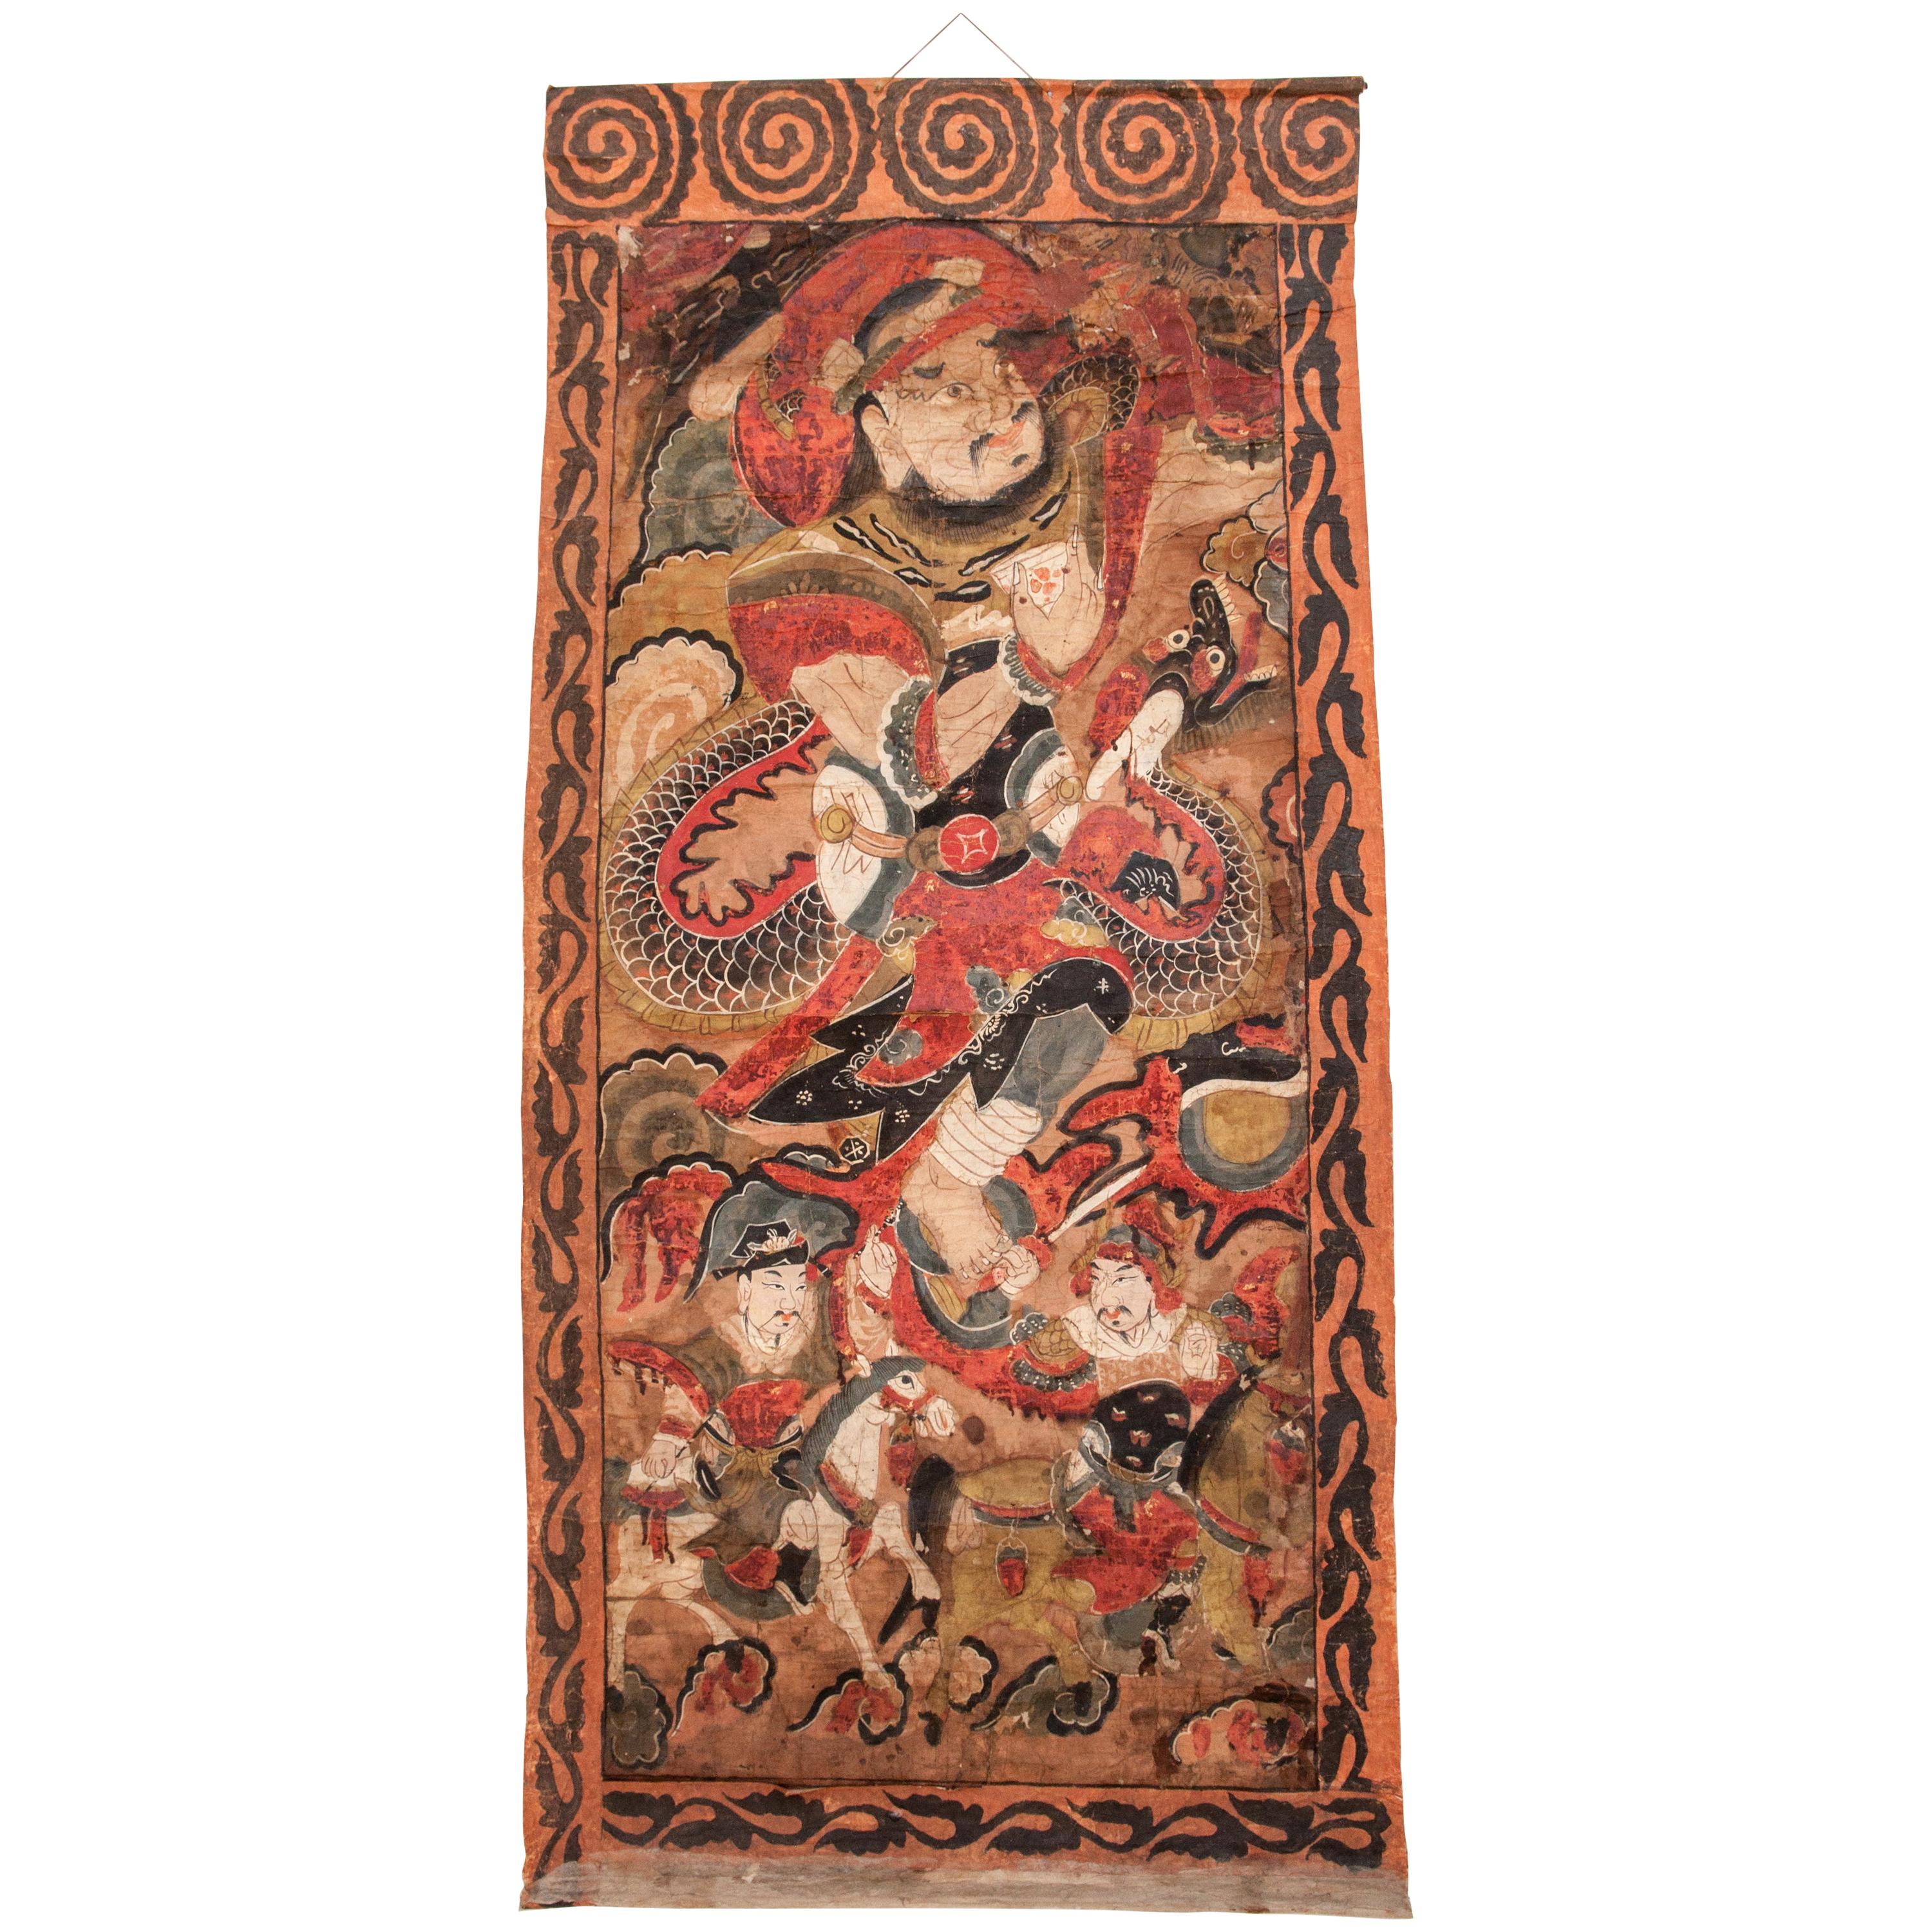 Yao Ceremonial Painting, Guizhou Province, China, Early to Mid-19th Century